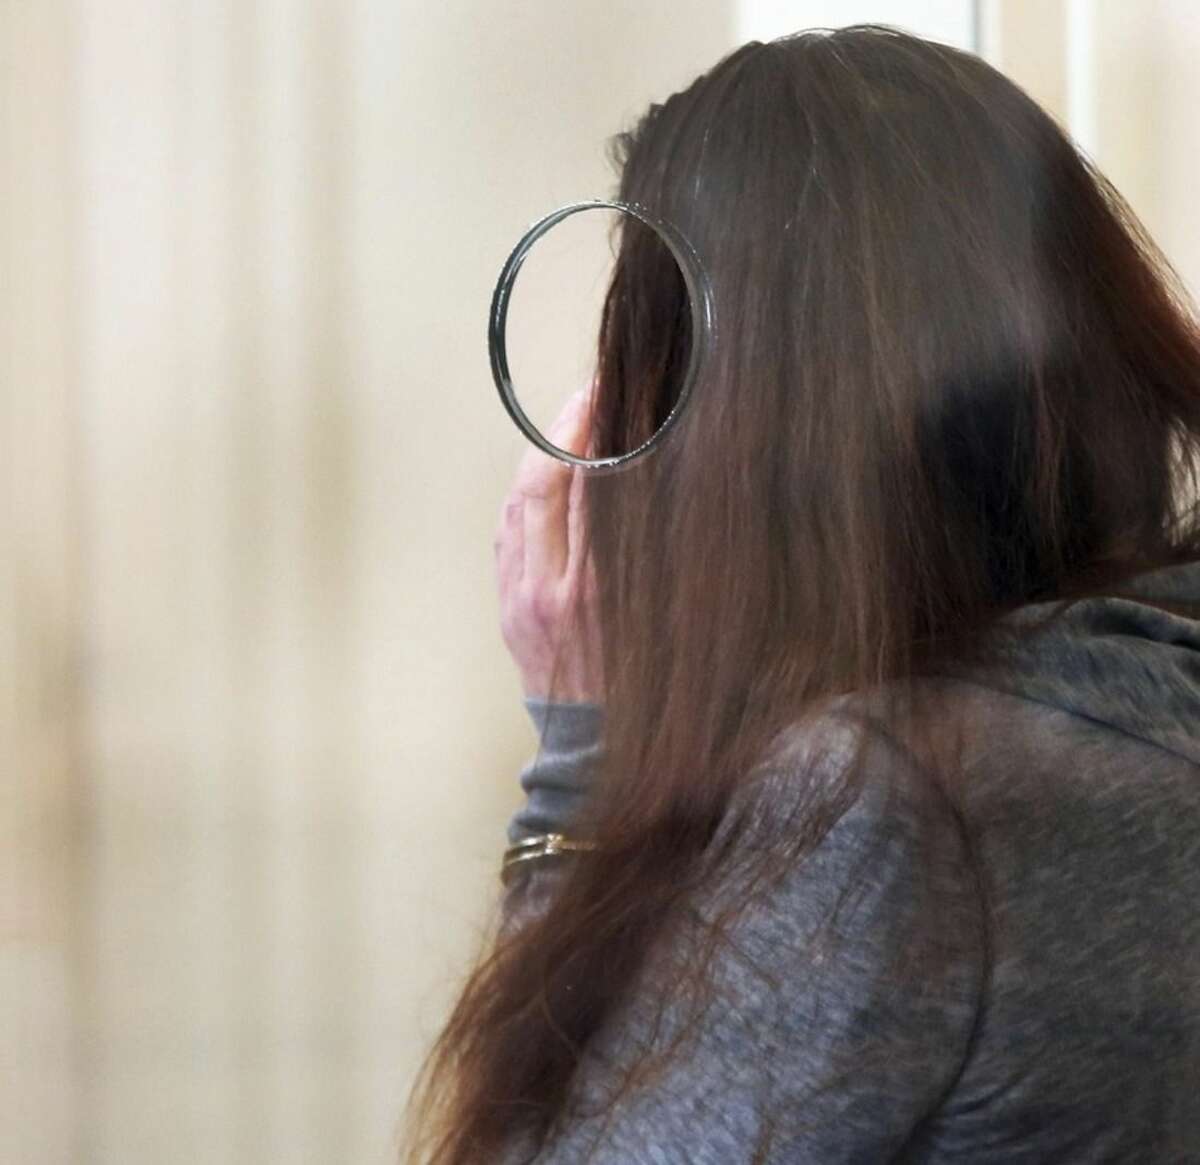 Rachelle Bond attends a hearing in Dorchester District Court, on Tuesday, Oct. 20, 2015, in Boston. Bond is charged with being an accessory after the fact in helping to dispose of the body of her daughter, Bella, the girl dubbed Baby Doe. Her boyfriend, Michael McCarthy is charged with murder. (Wendy Maeda/The Boston Globe via AP, Pool)